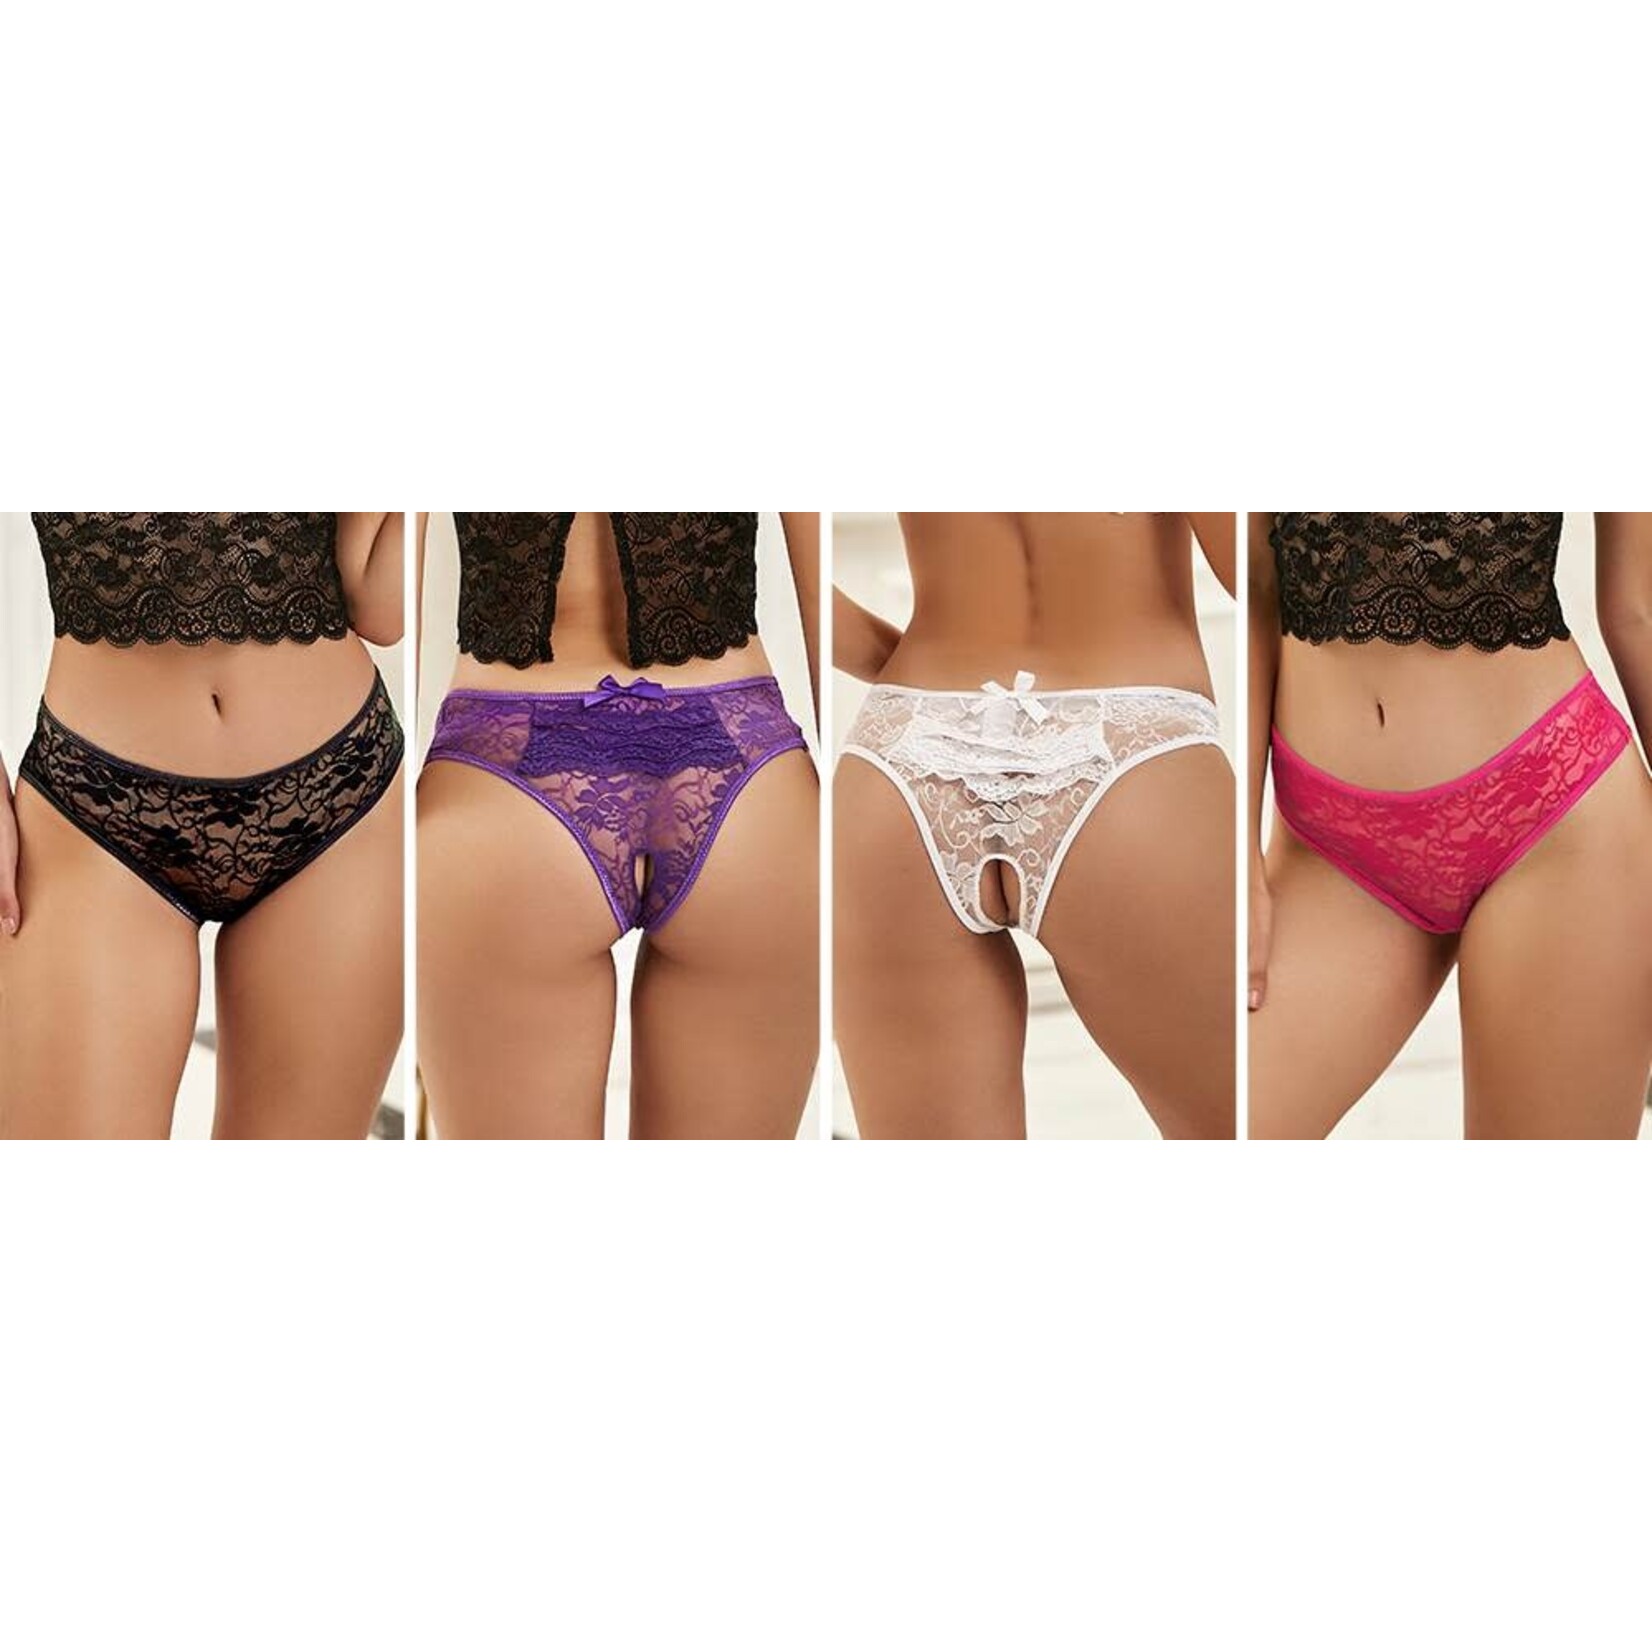 OH YEAH! -  OPEN CROTCH FLORAL LACE PANTY 4IN1 BOX XS-S